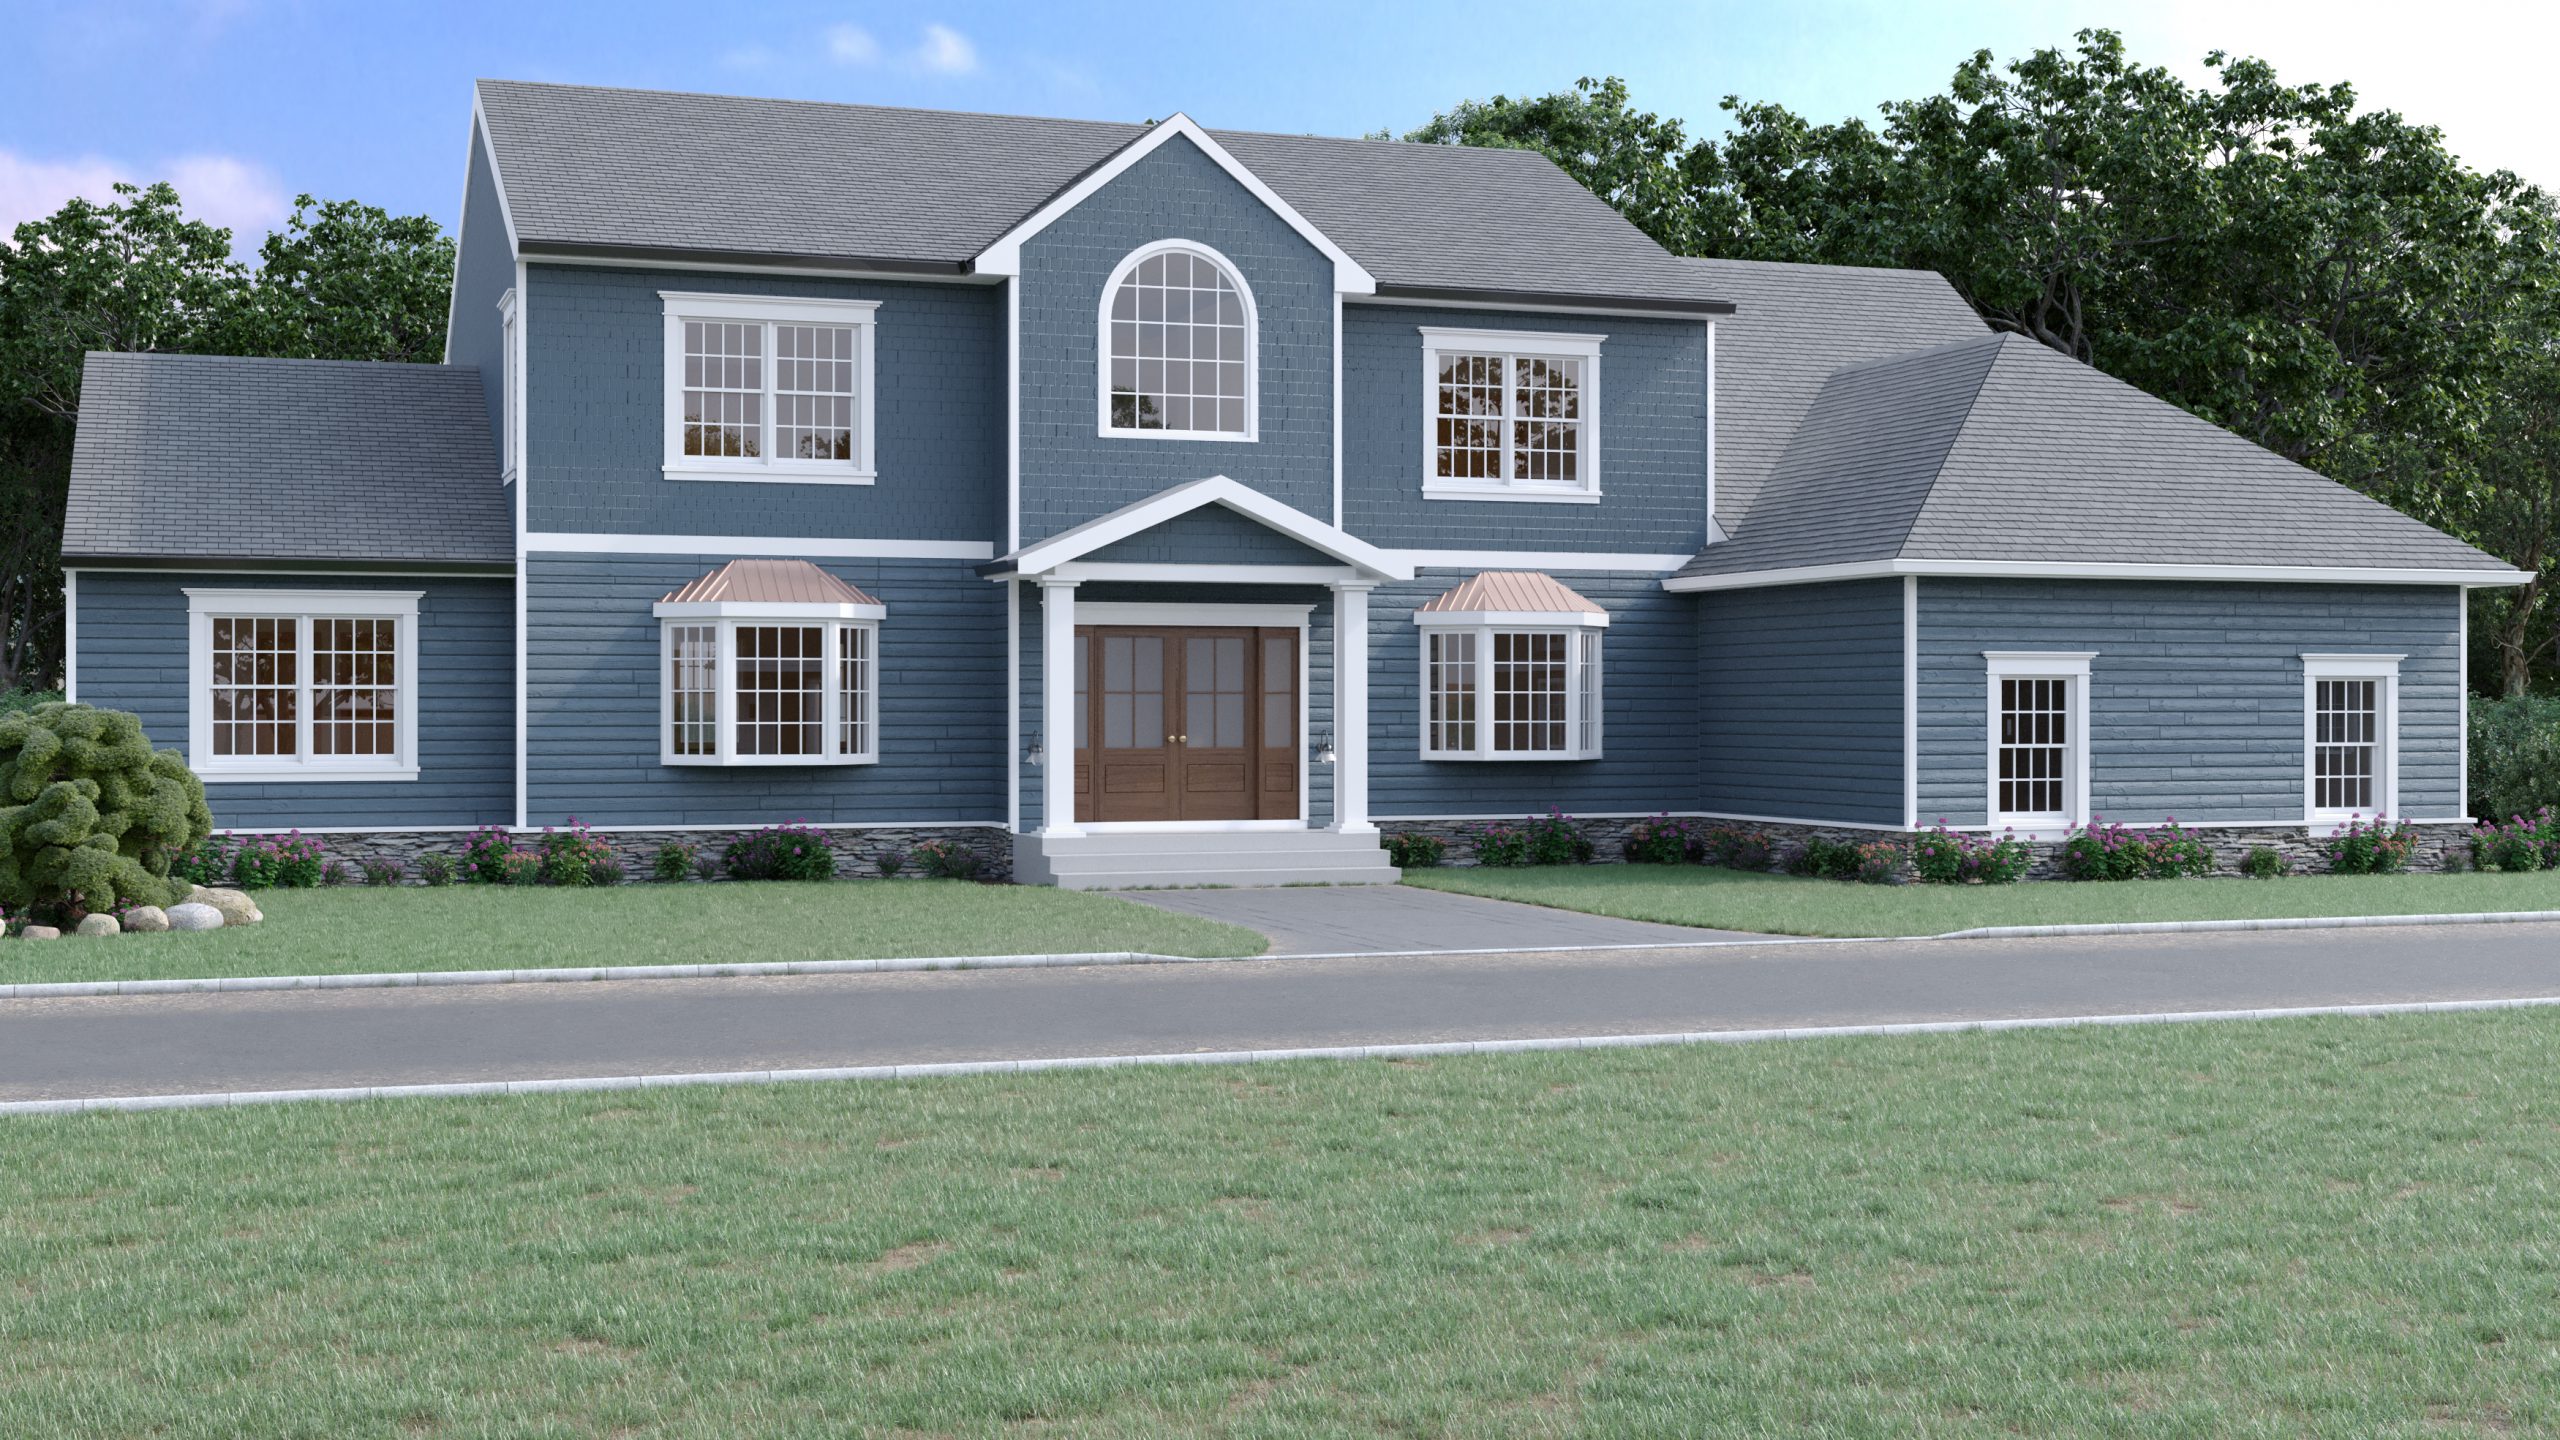 New Home construction and architect, Piscataway NJ